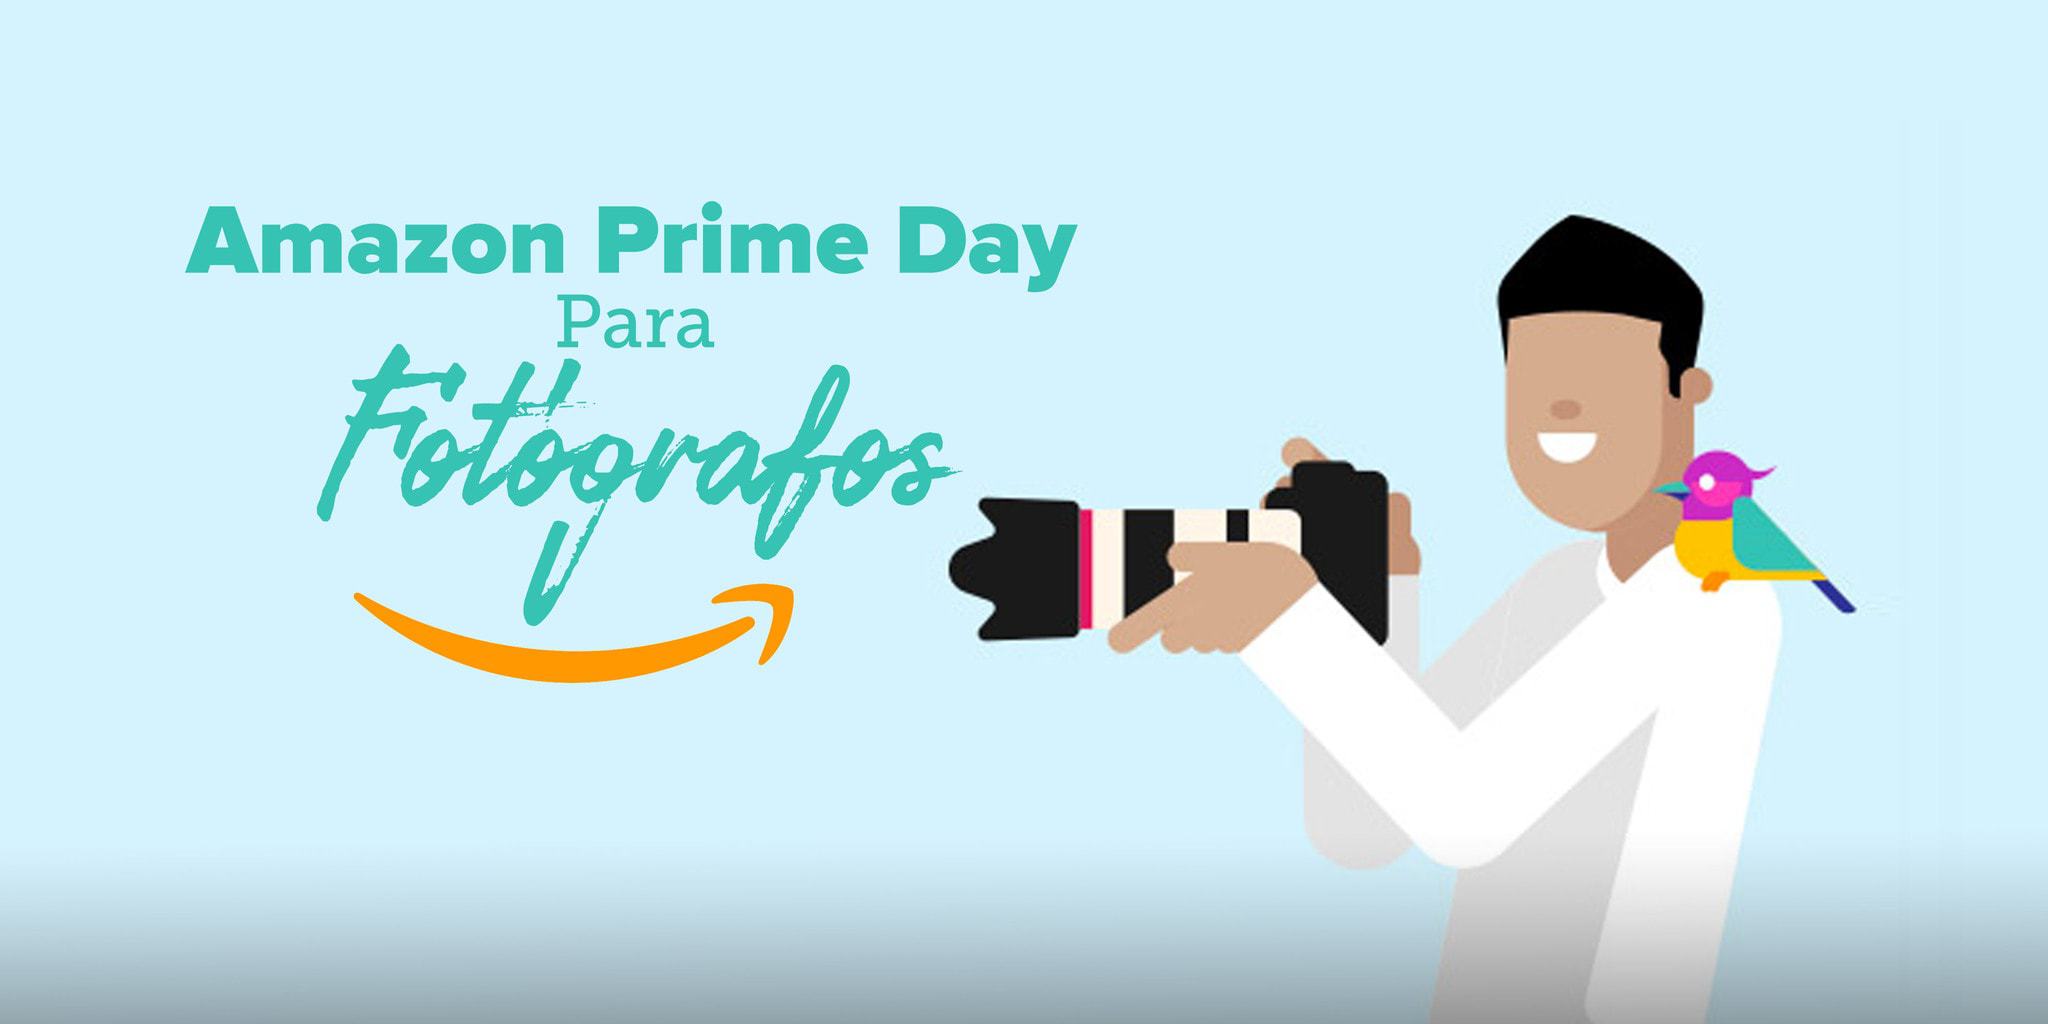 AMAZON PRIME DAY 2018 OF PHOTOGRAPHY: OFFERS ON PHOTO AND VIDEO CAMERAS